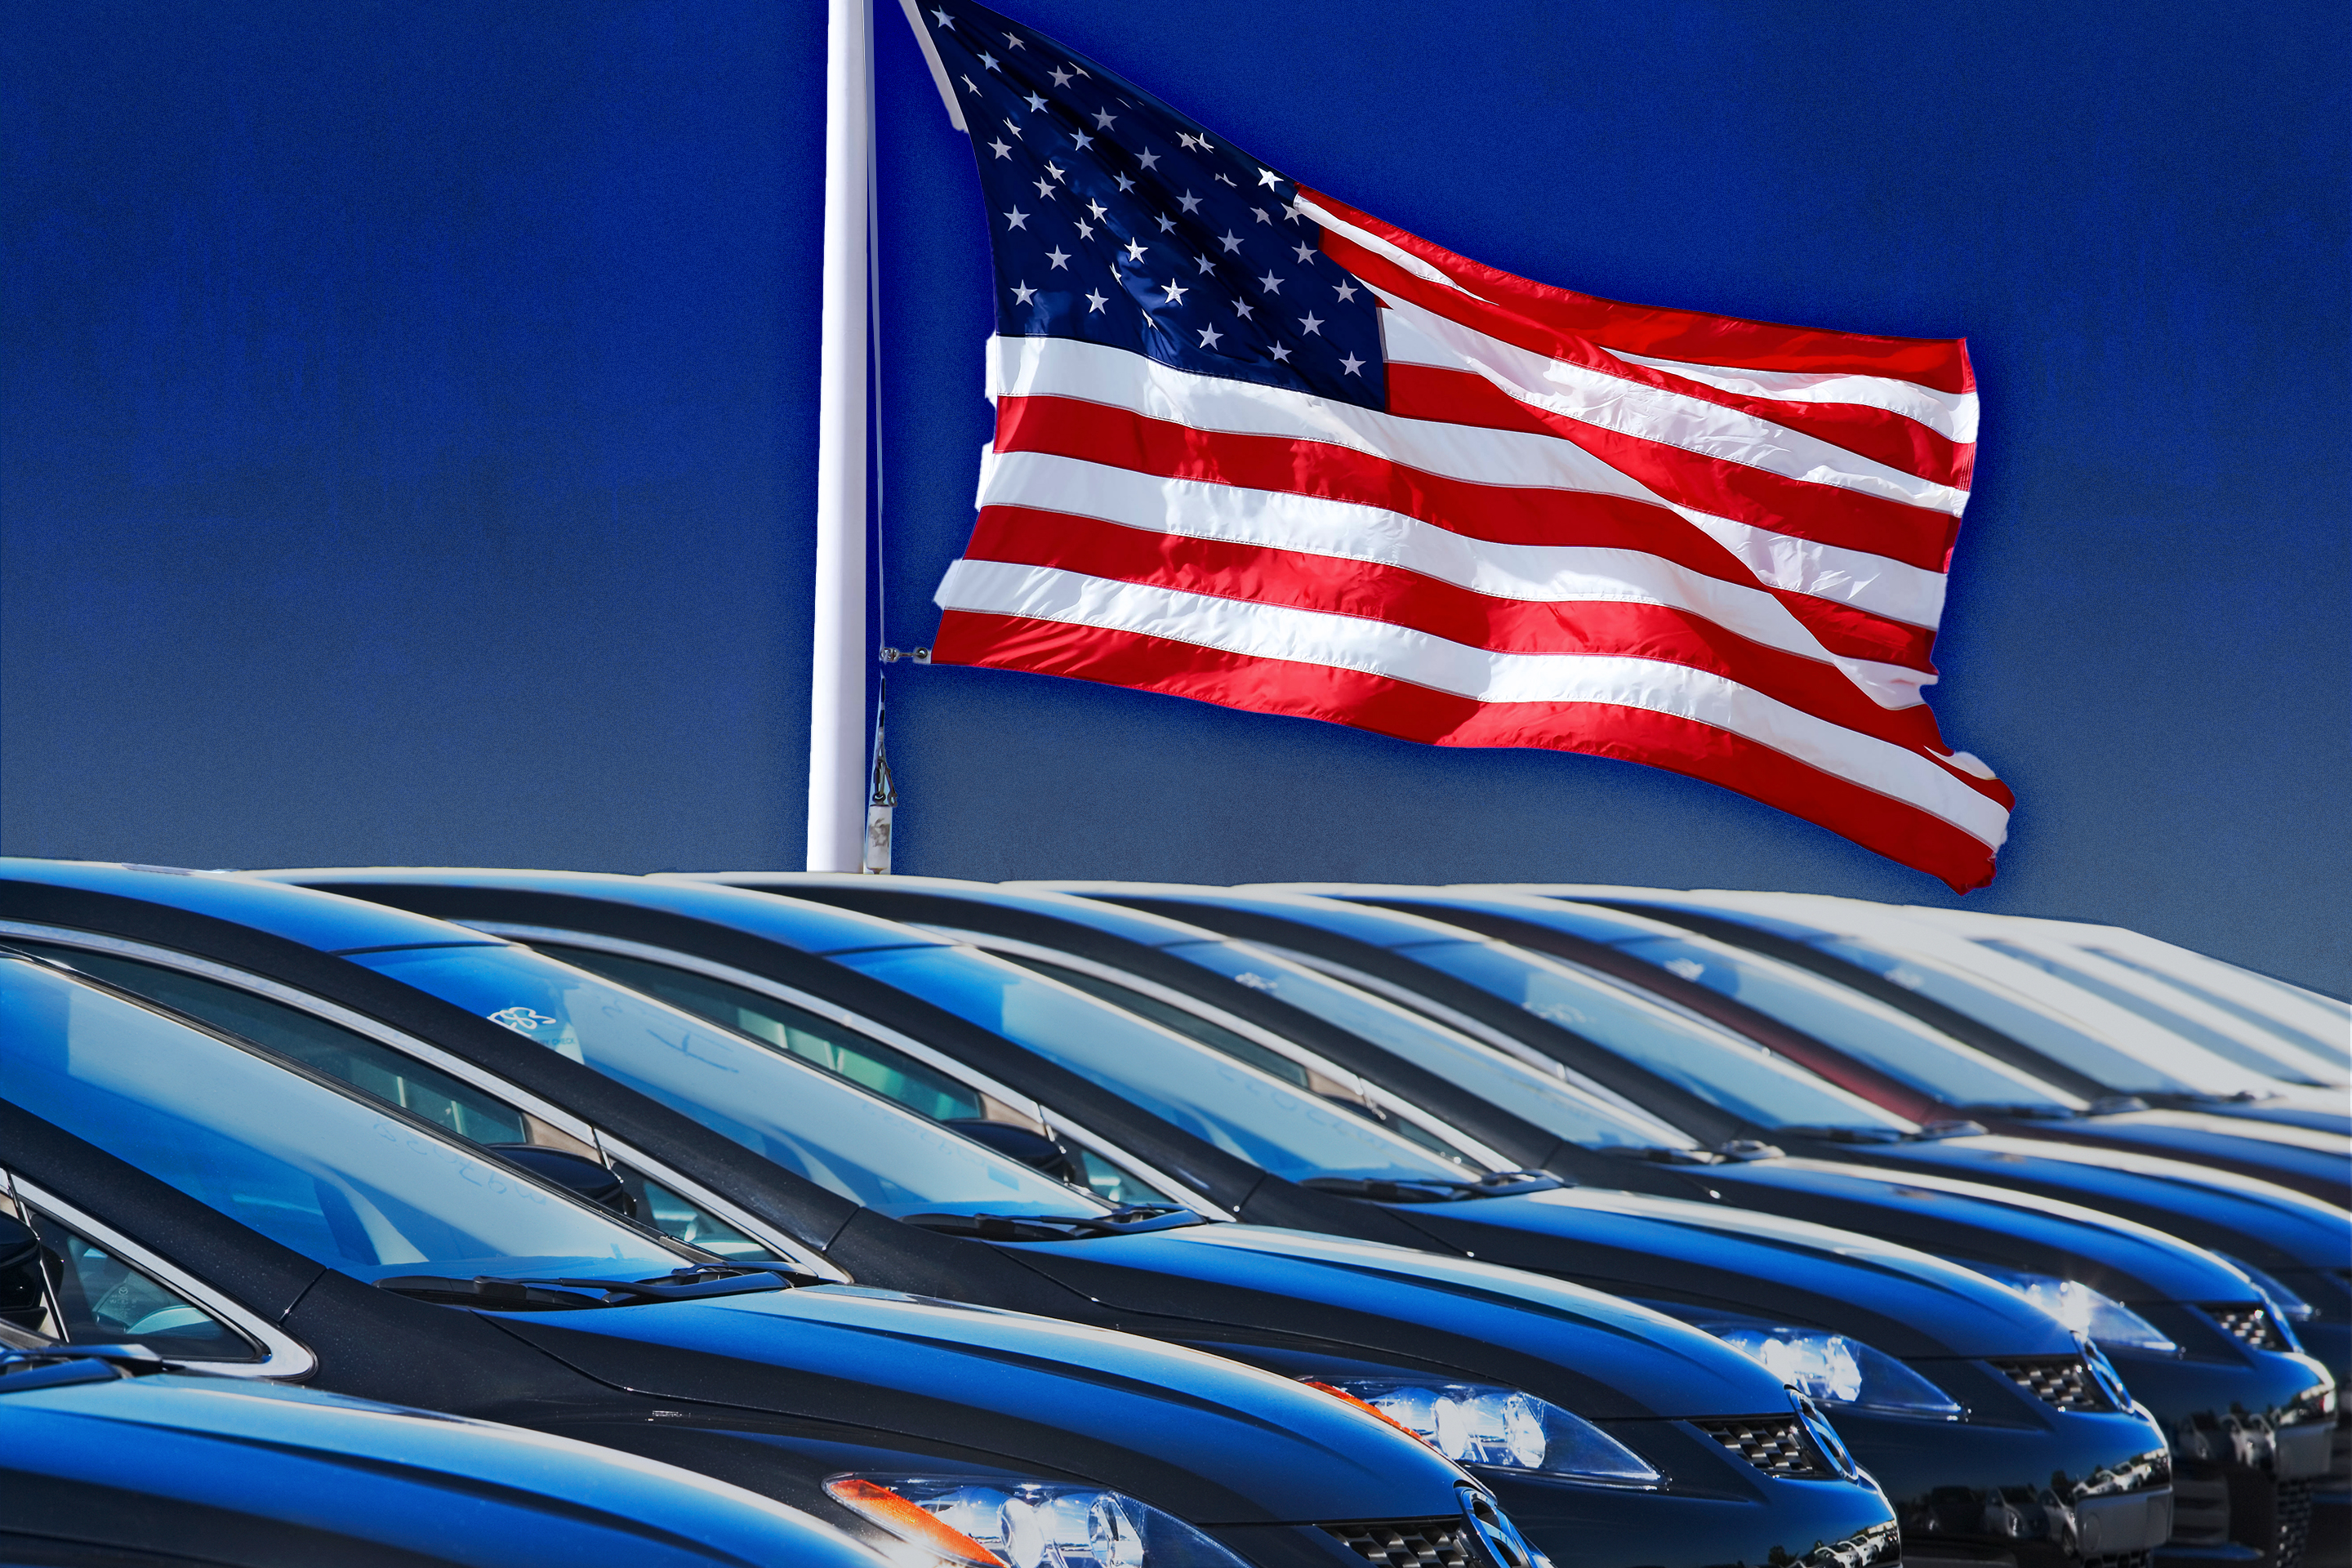 Is Memorial Day Actually a Good Time to Buy a Car?